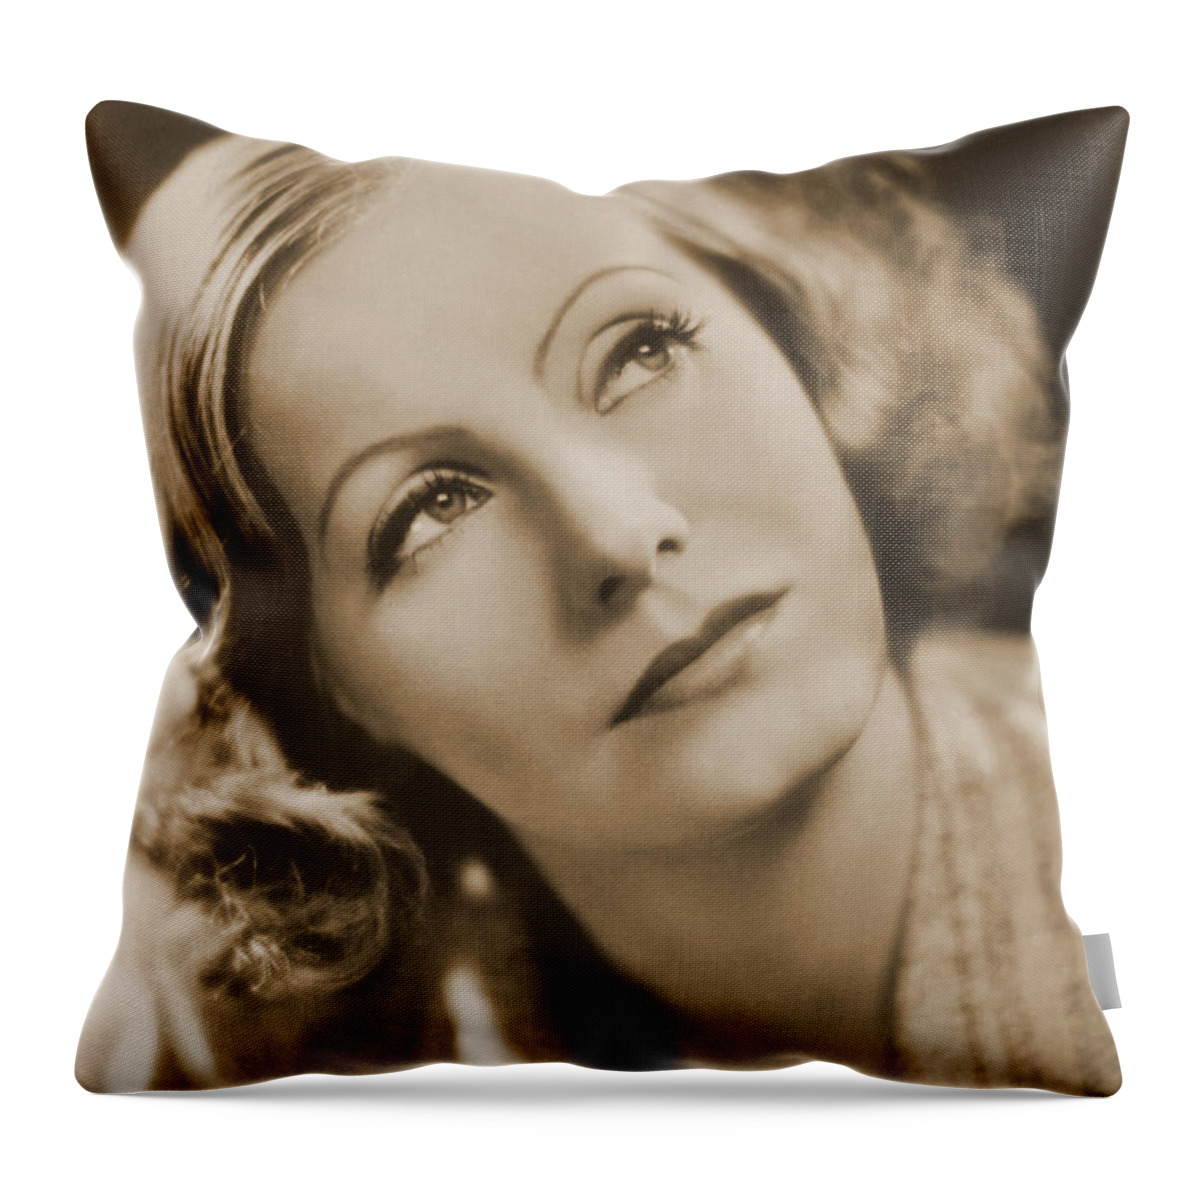 Entertainment Throw Pillow featuring the photograph Greta Garbo, Hollywood Movie Star by Photo Researchers